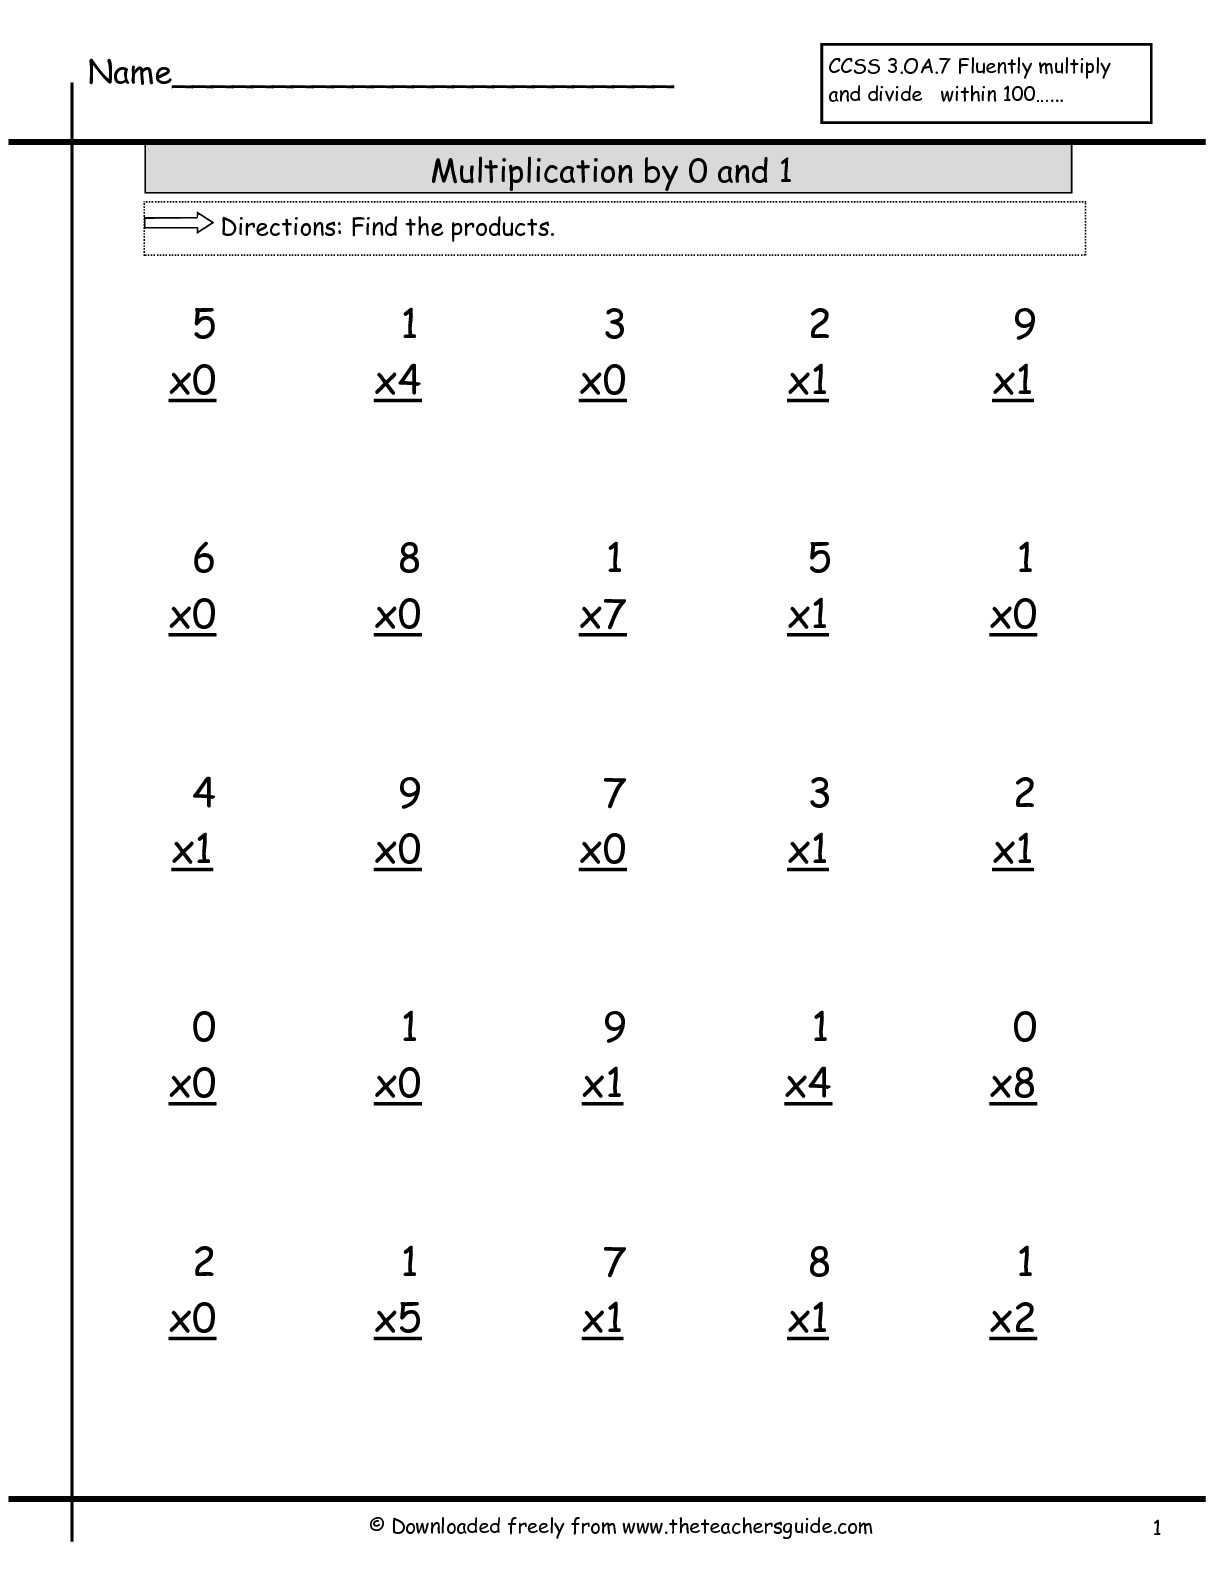 Multiplication Facts Worksheets From The Teacher&amp;#039;s Guide inside Multiplication Worksheets Zero And Ones